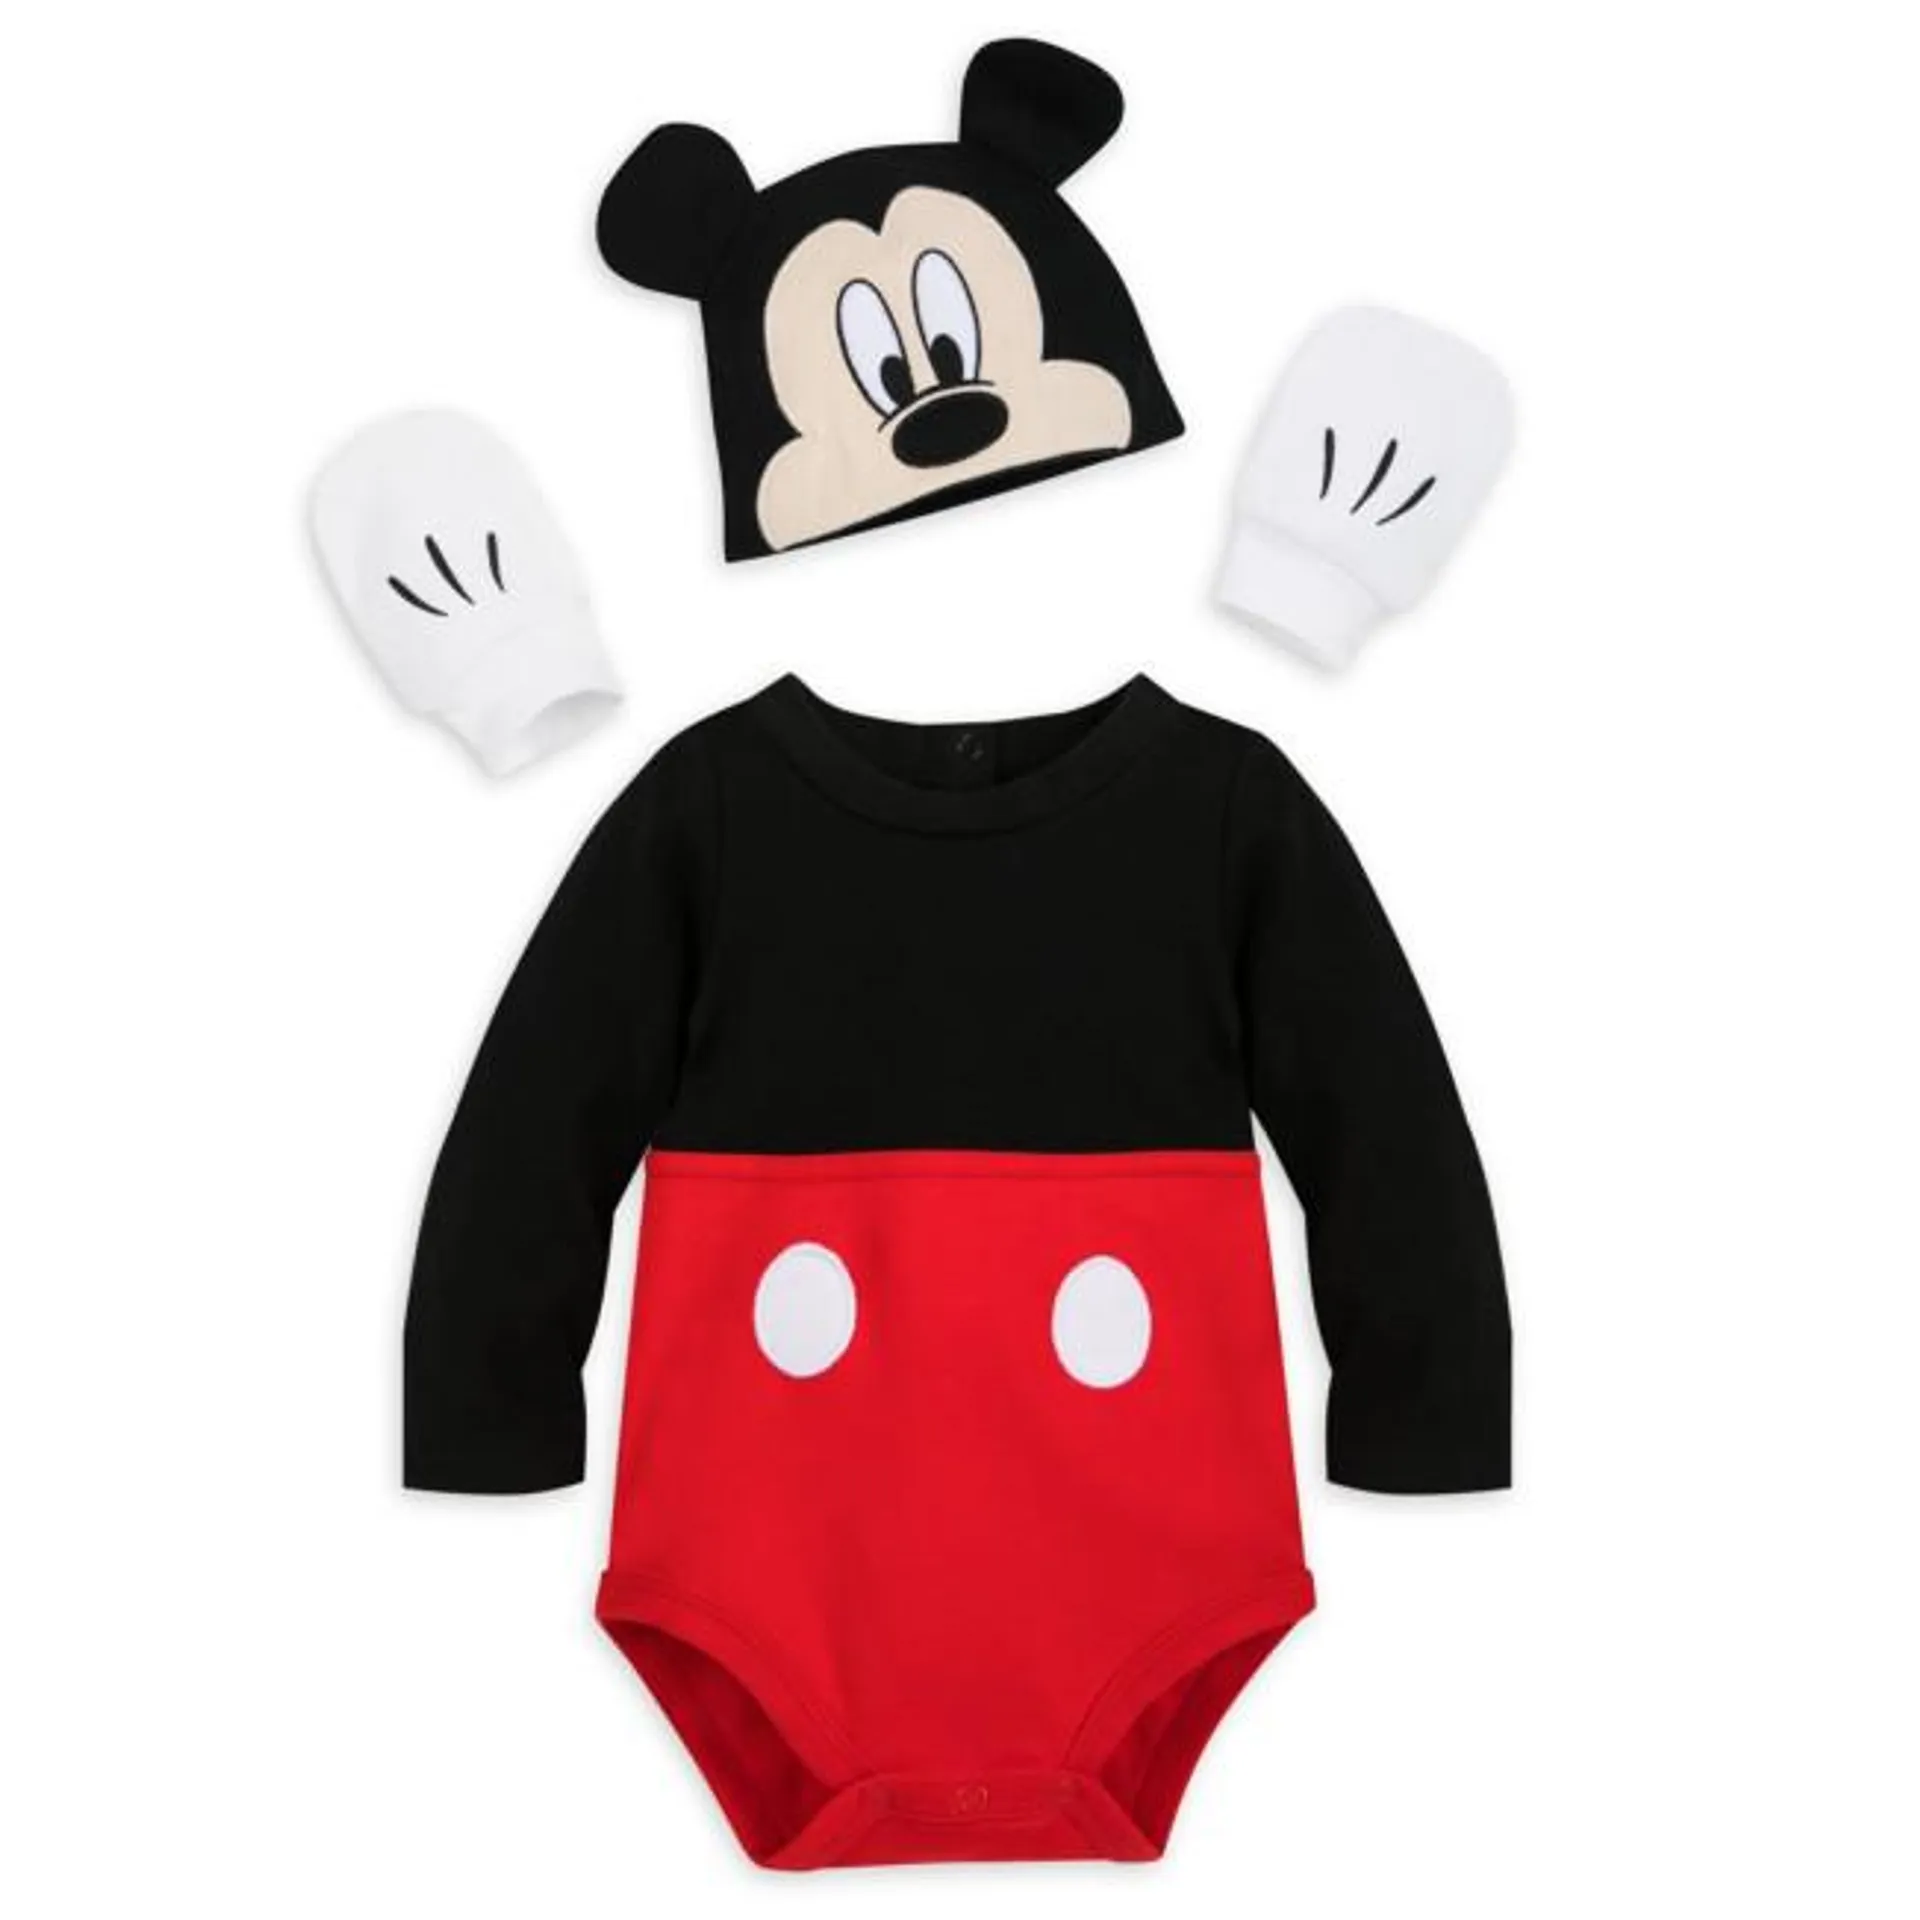 Disney Store Mickey Mouse Baby Costume Body Suit